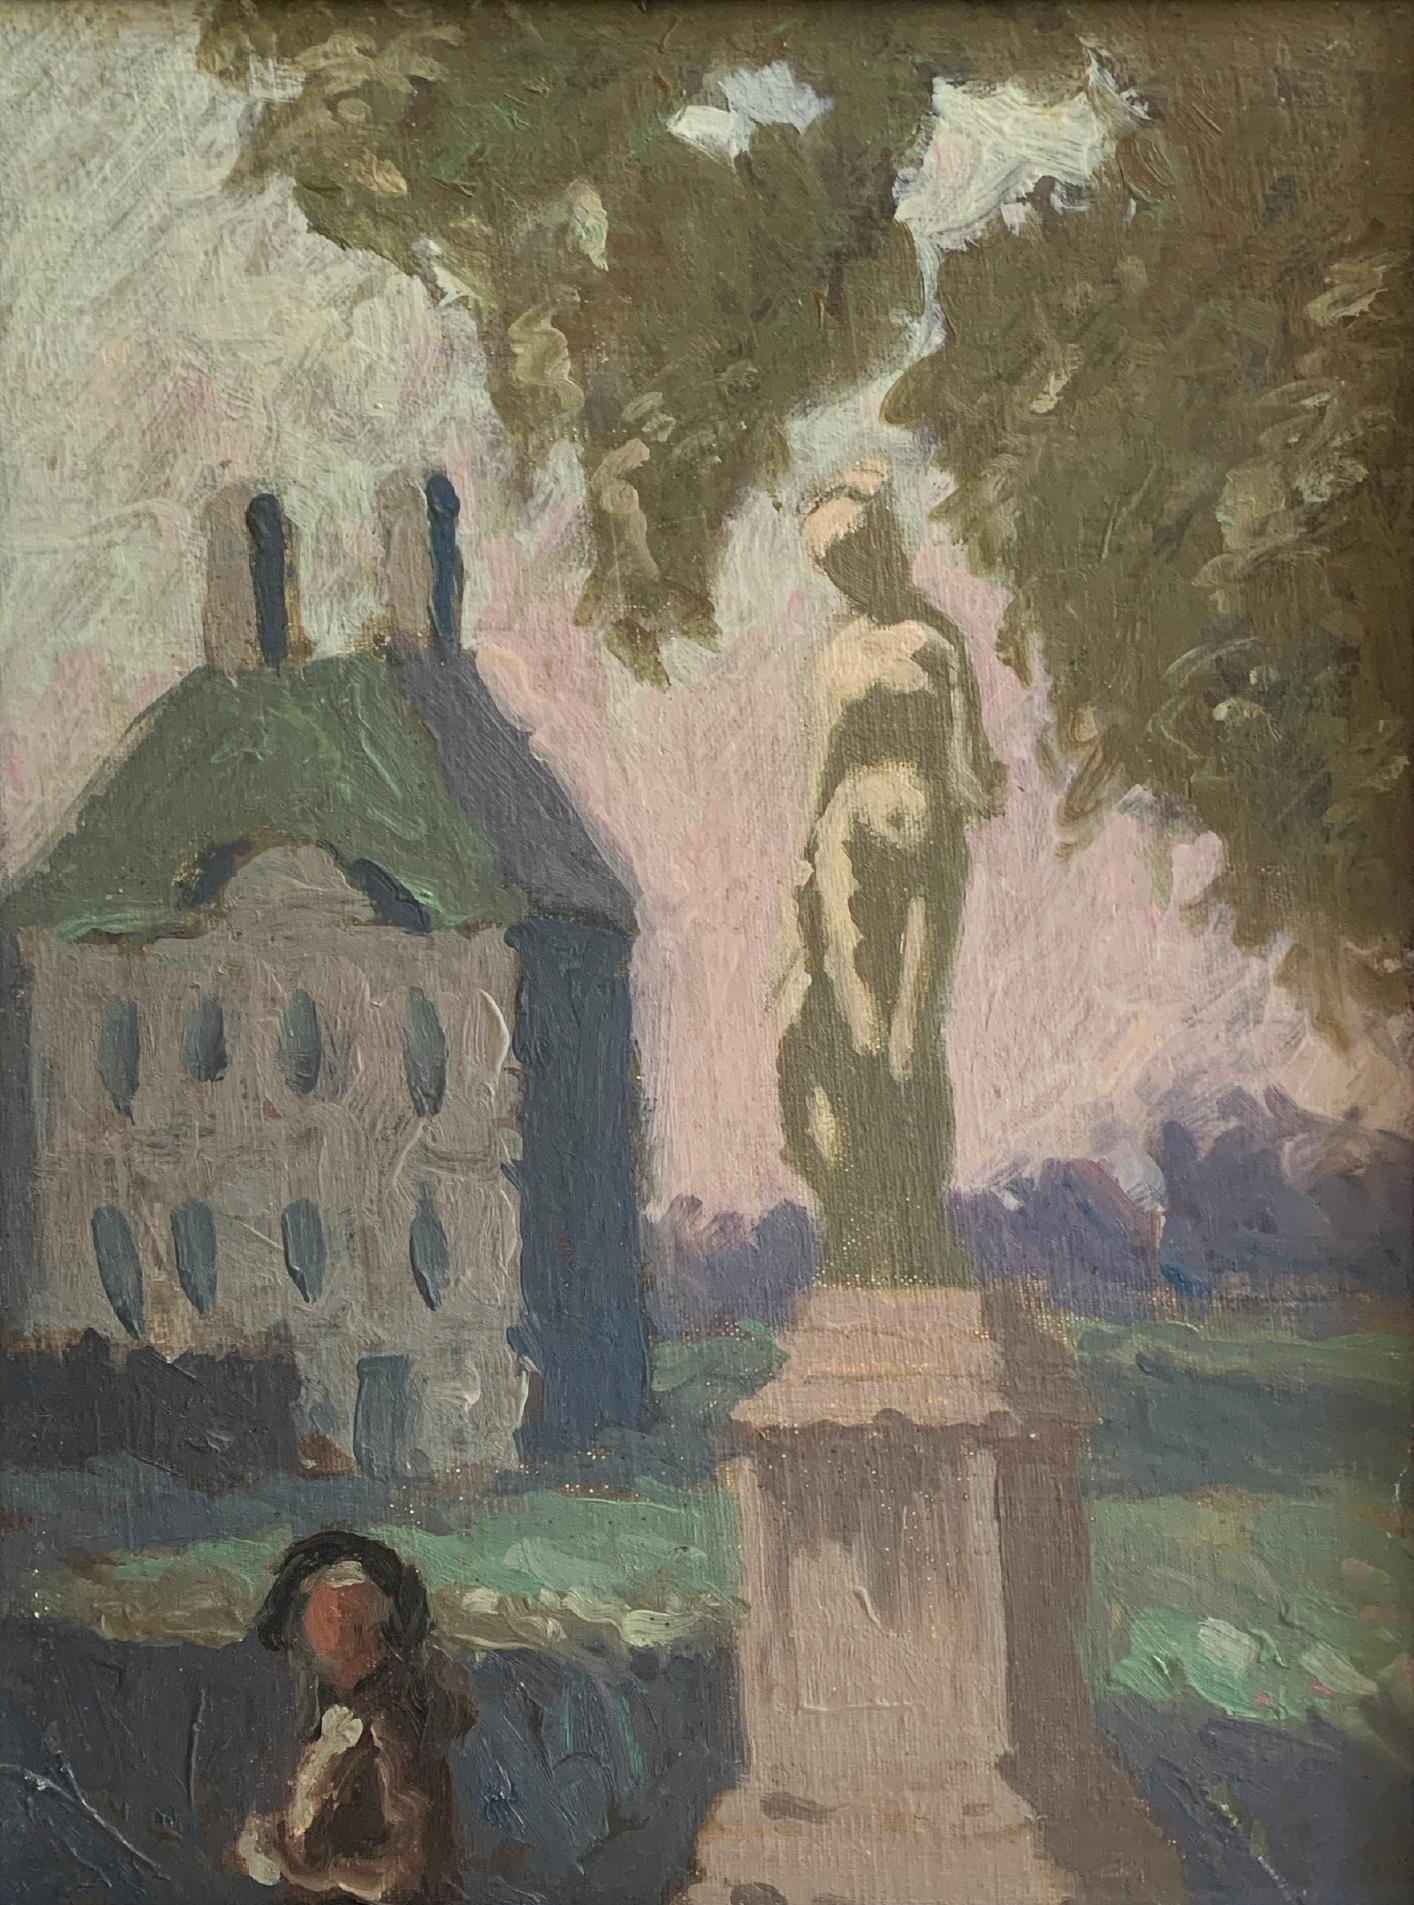 A lovely oil on board scene of Paris by American artist Stuart C. Henry (1906-1991), presenting a figure walking in the Tuileries Garden. 

Upon graduating from Harvard with a degree in fine art in 1928, Stuart Henry traveled extensively for